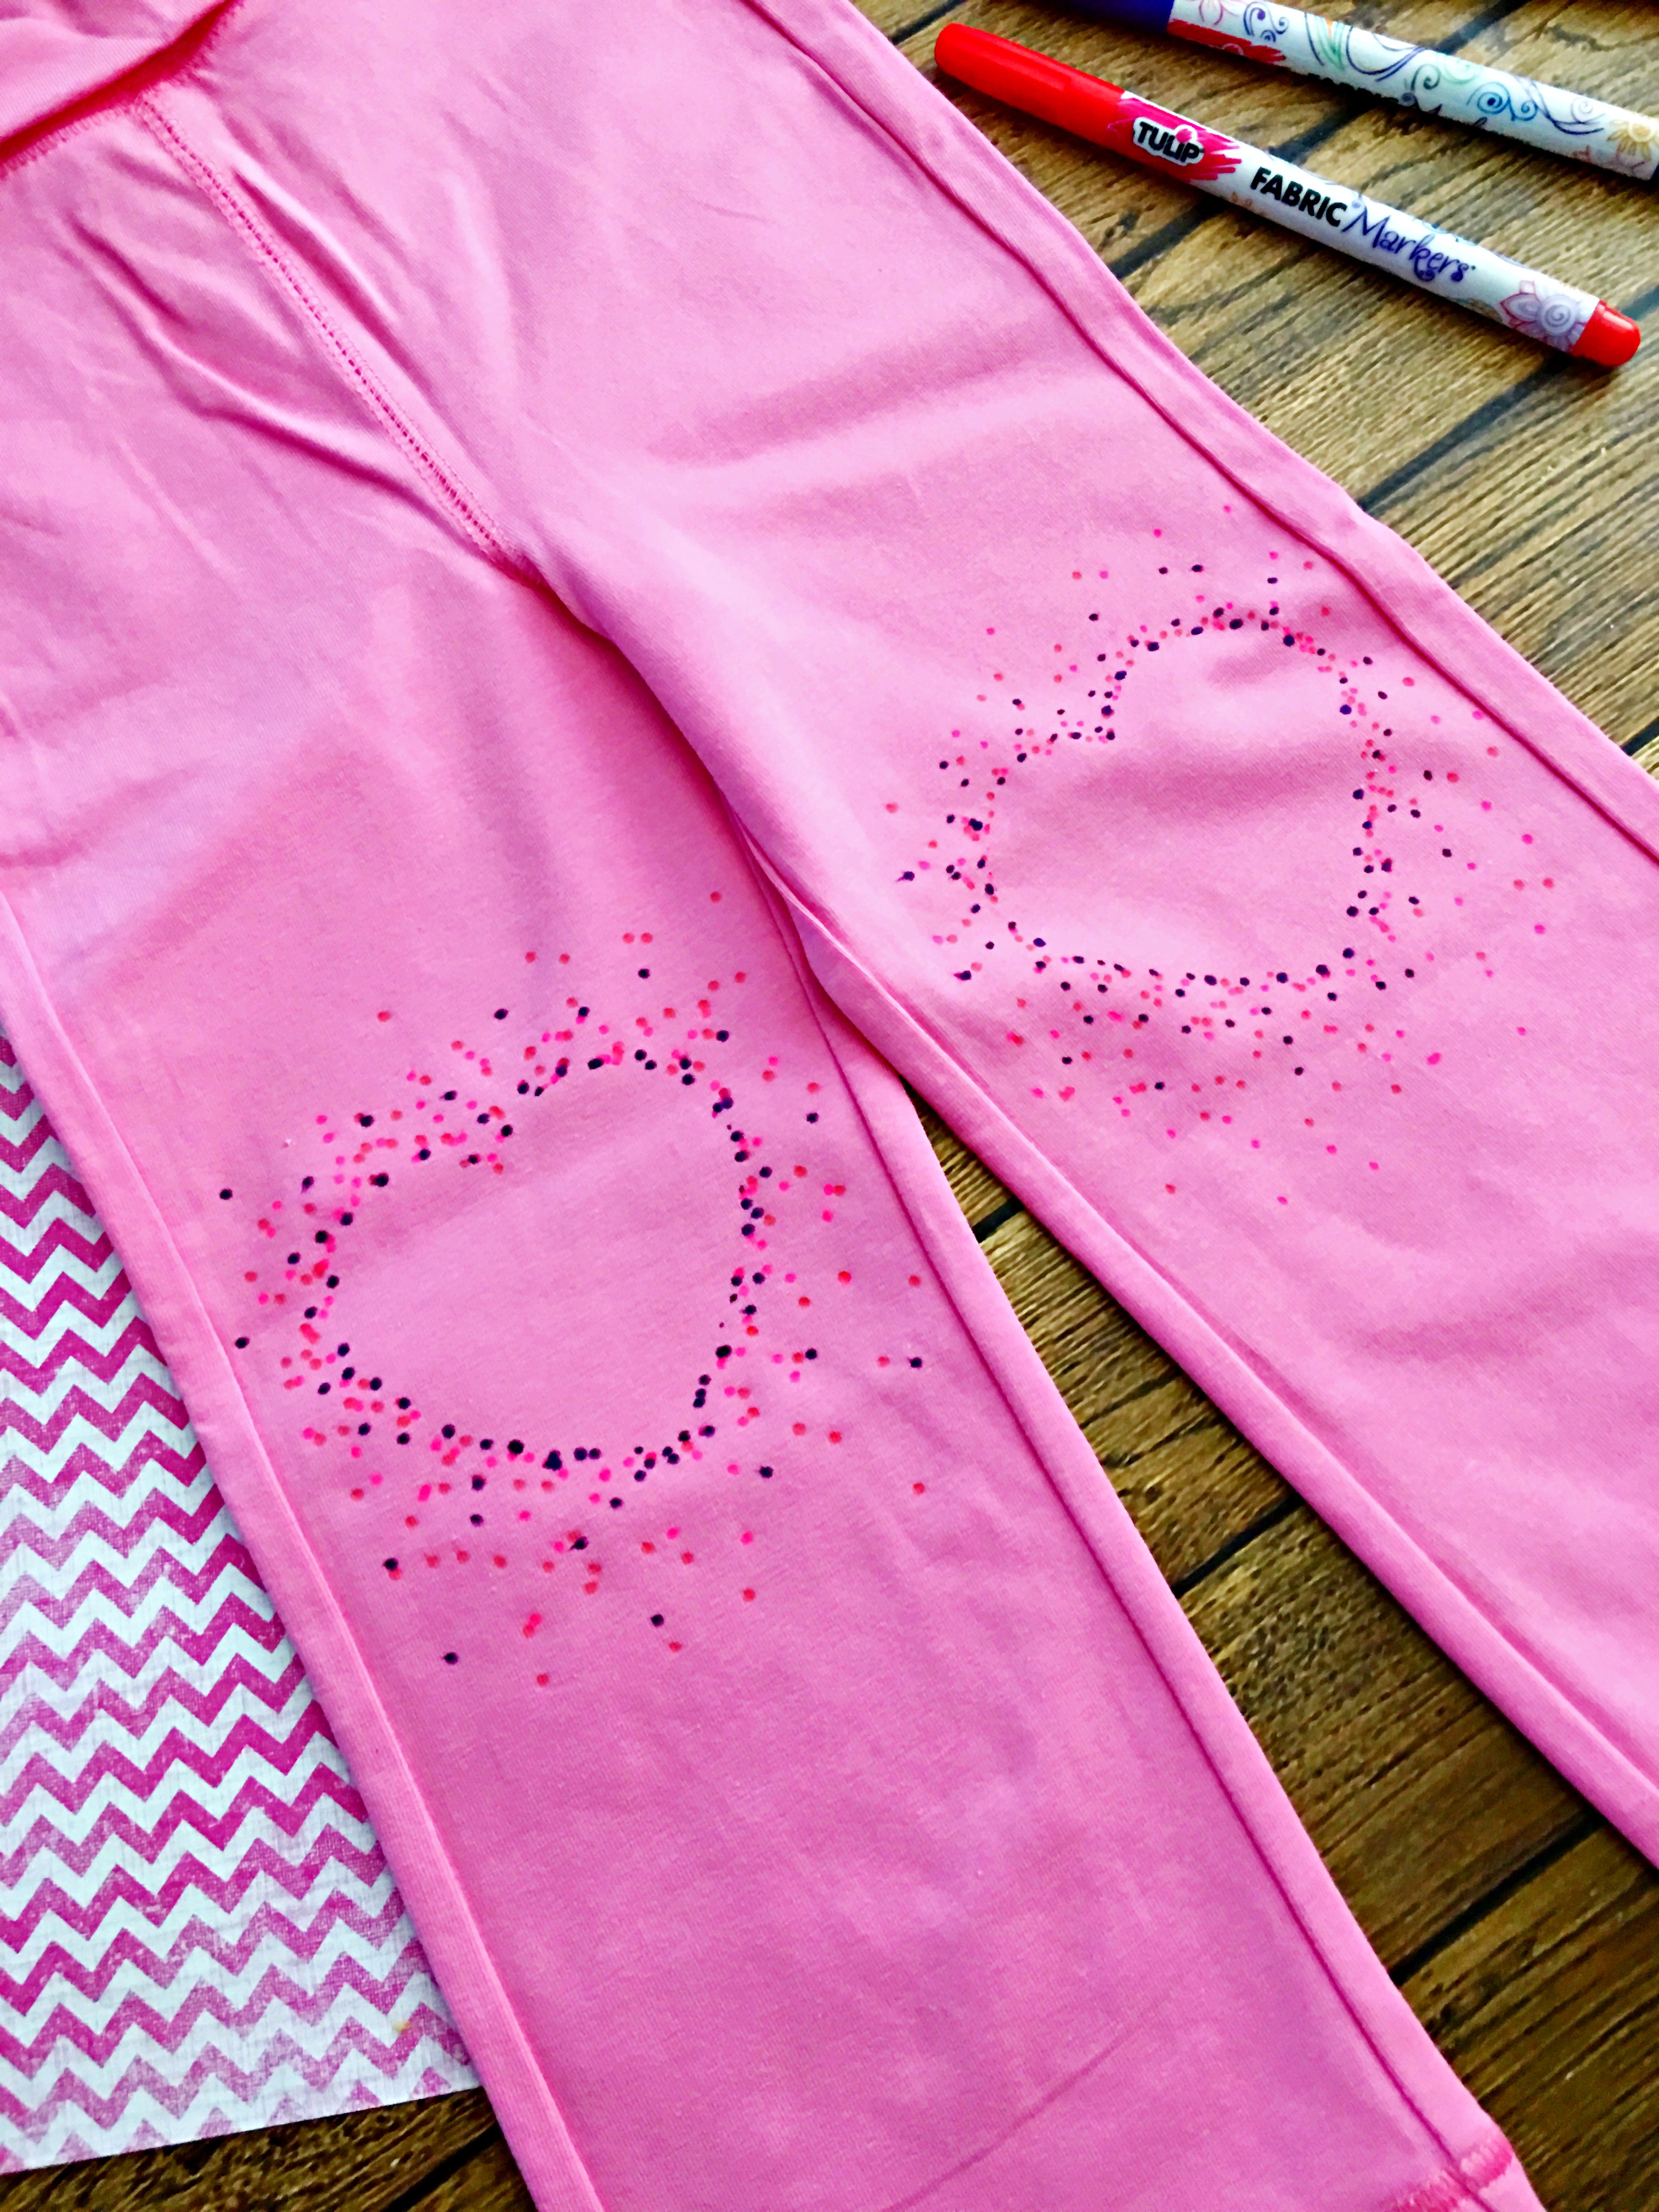 These DIY Kids Heart Dot Knee Pad Pants are adorable and super easy to make.  Perfect for Valentine's Day, but your little sweetie won't mind wearing these year round!